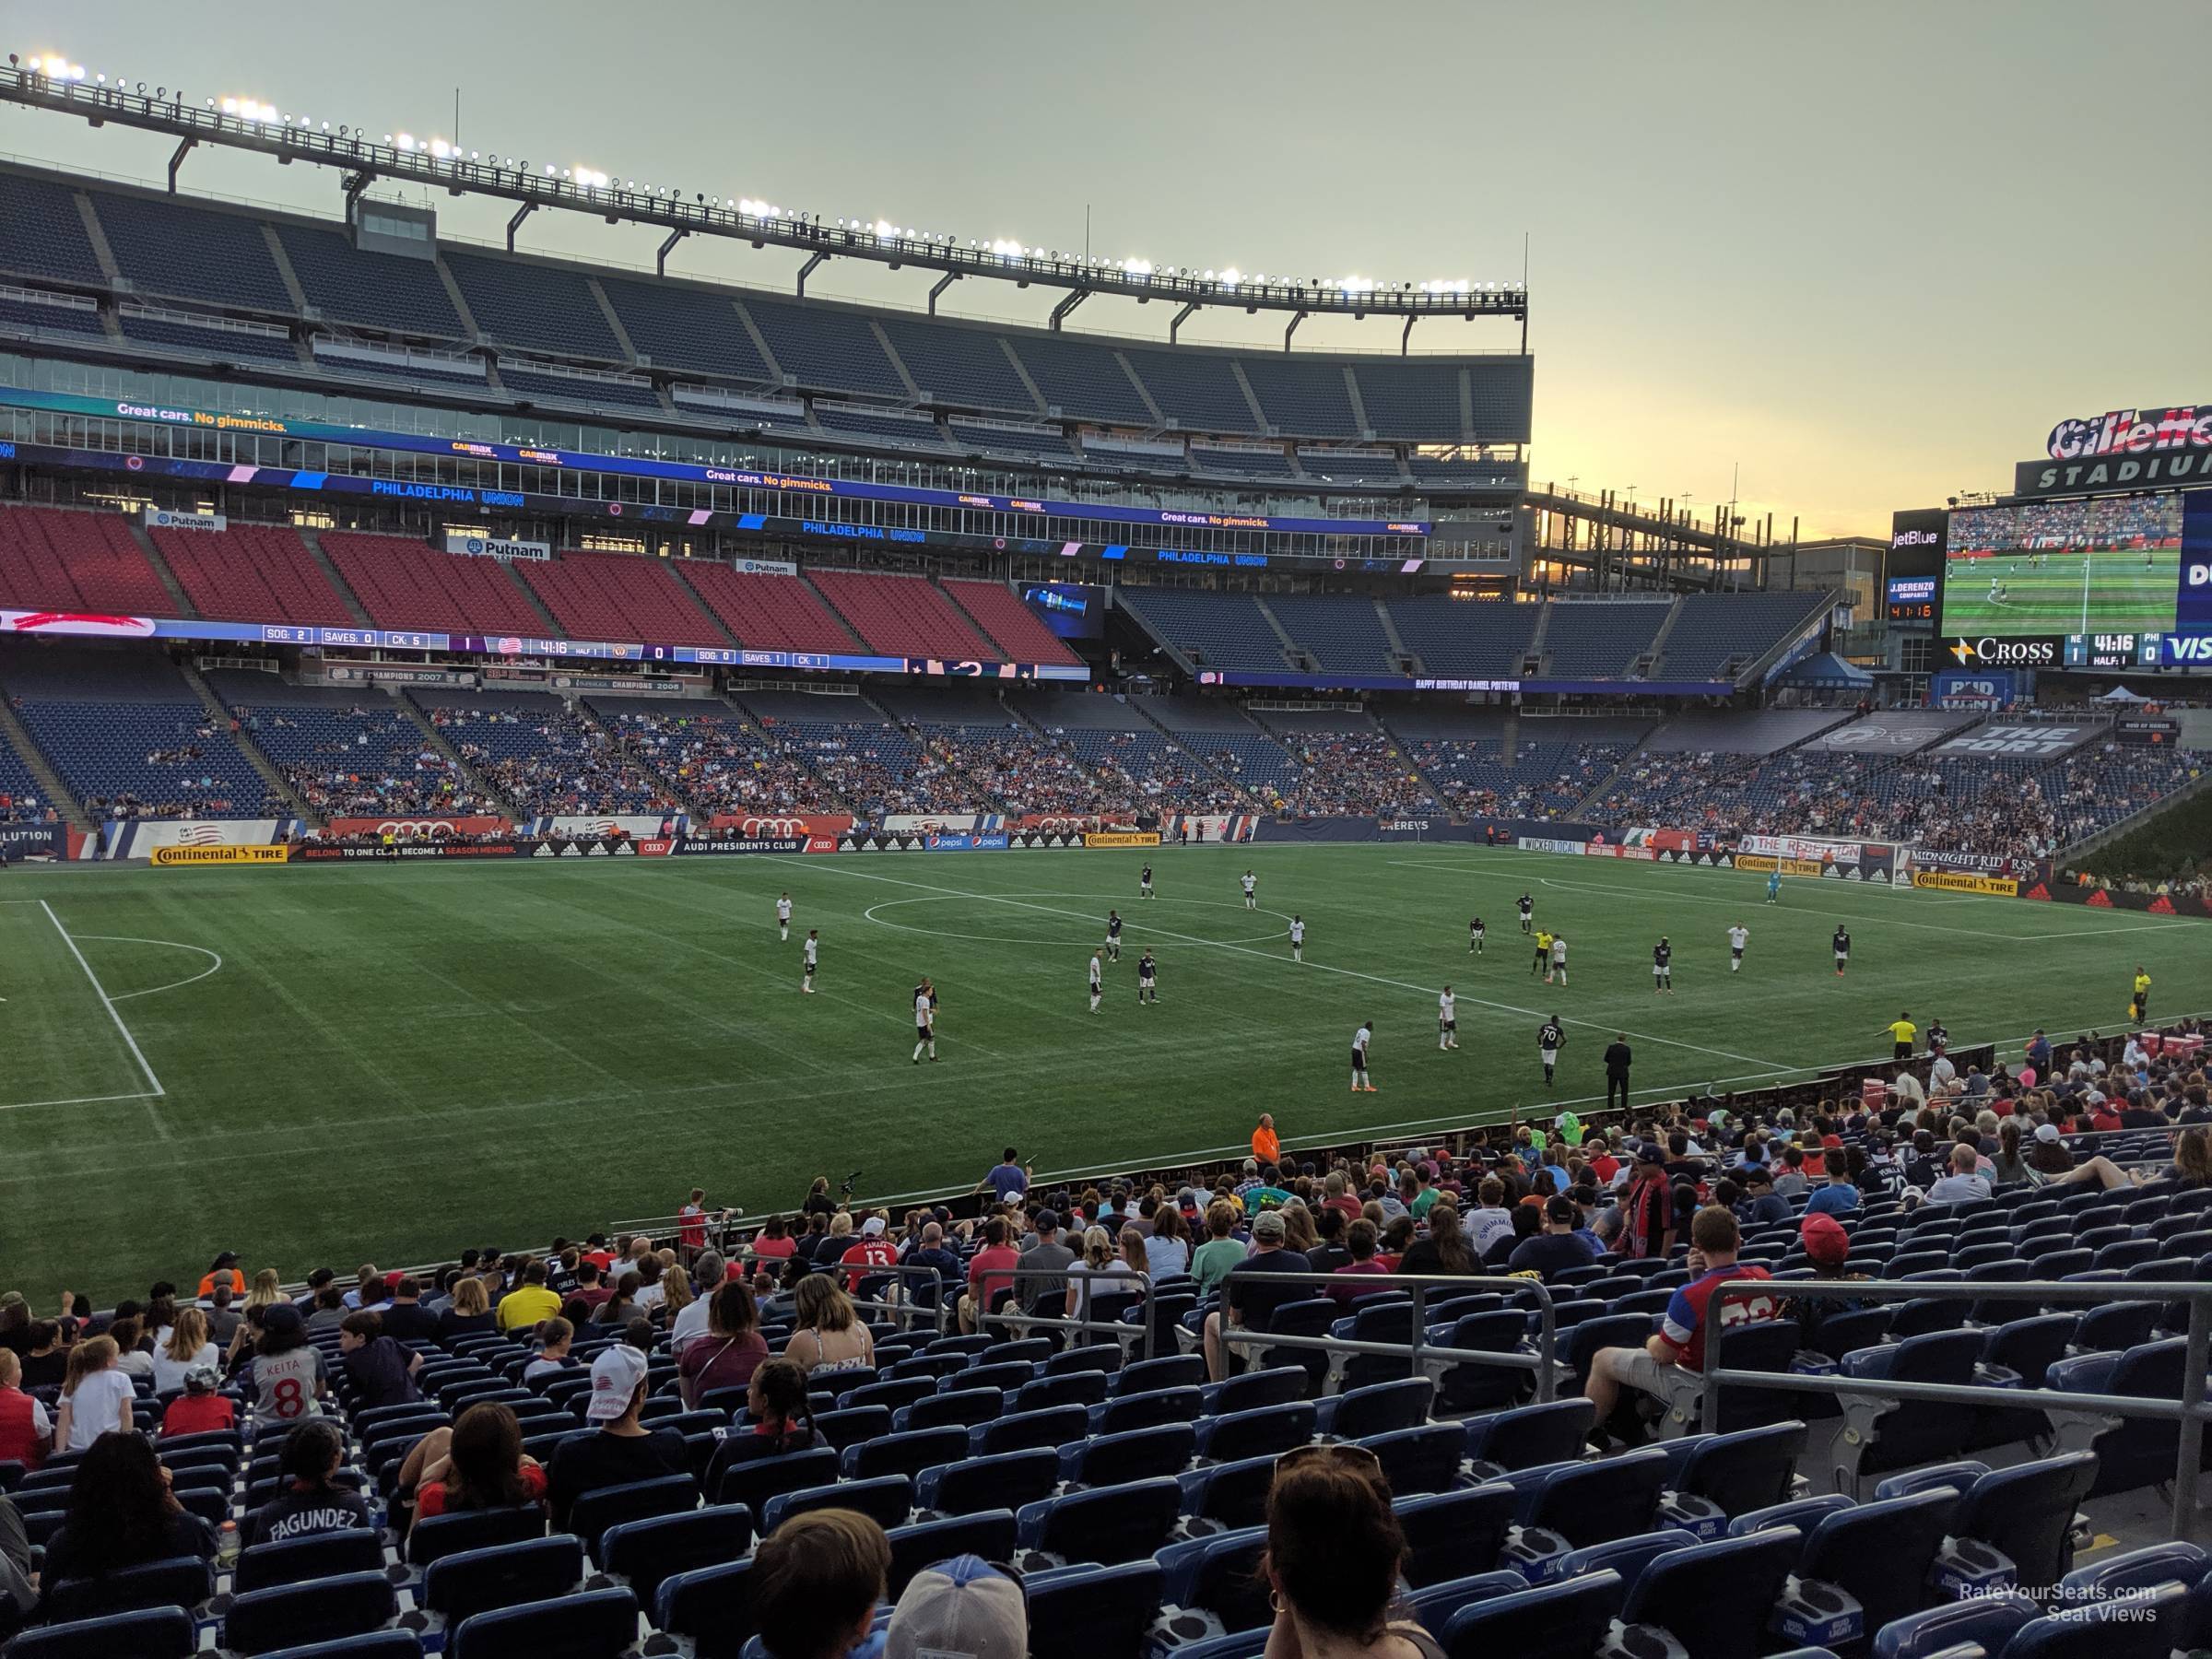 section 113, row 25 seat view  for soccer - gillette stadium